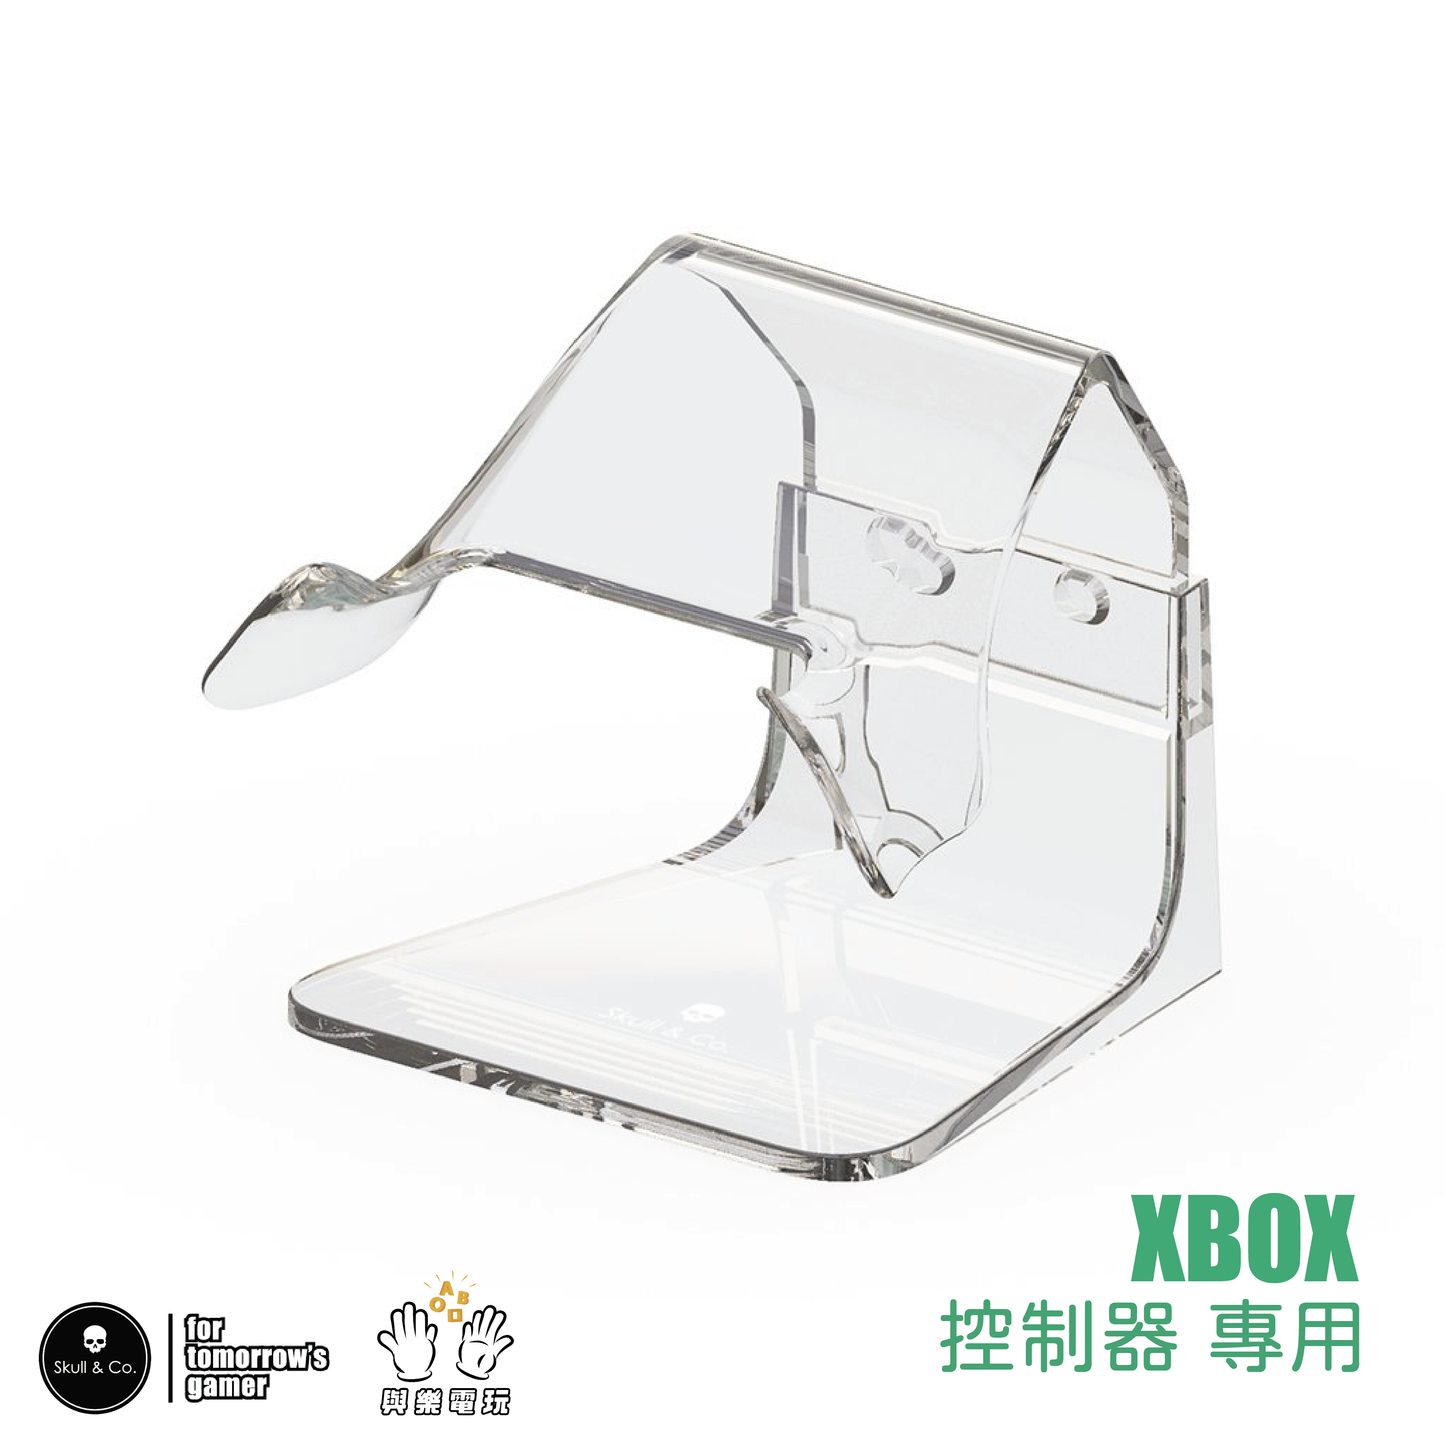 Phantom Stand/Rack is suitable for various game controllers